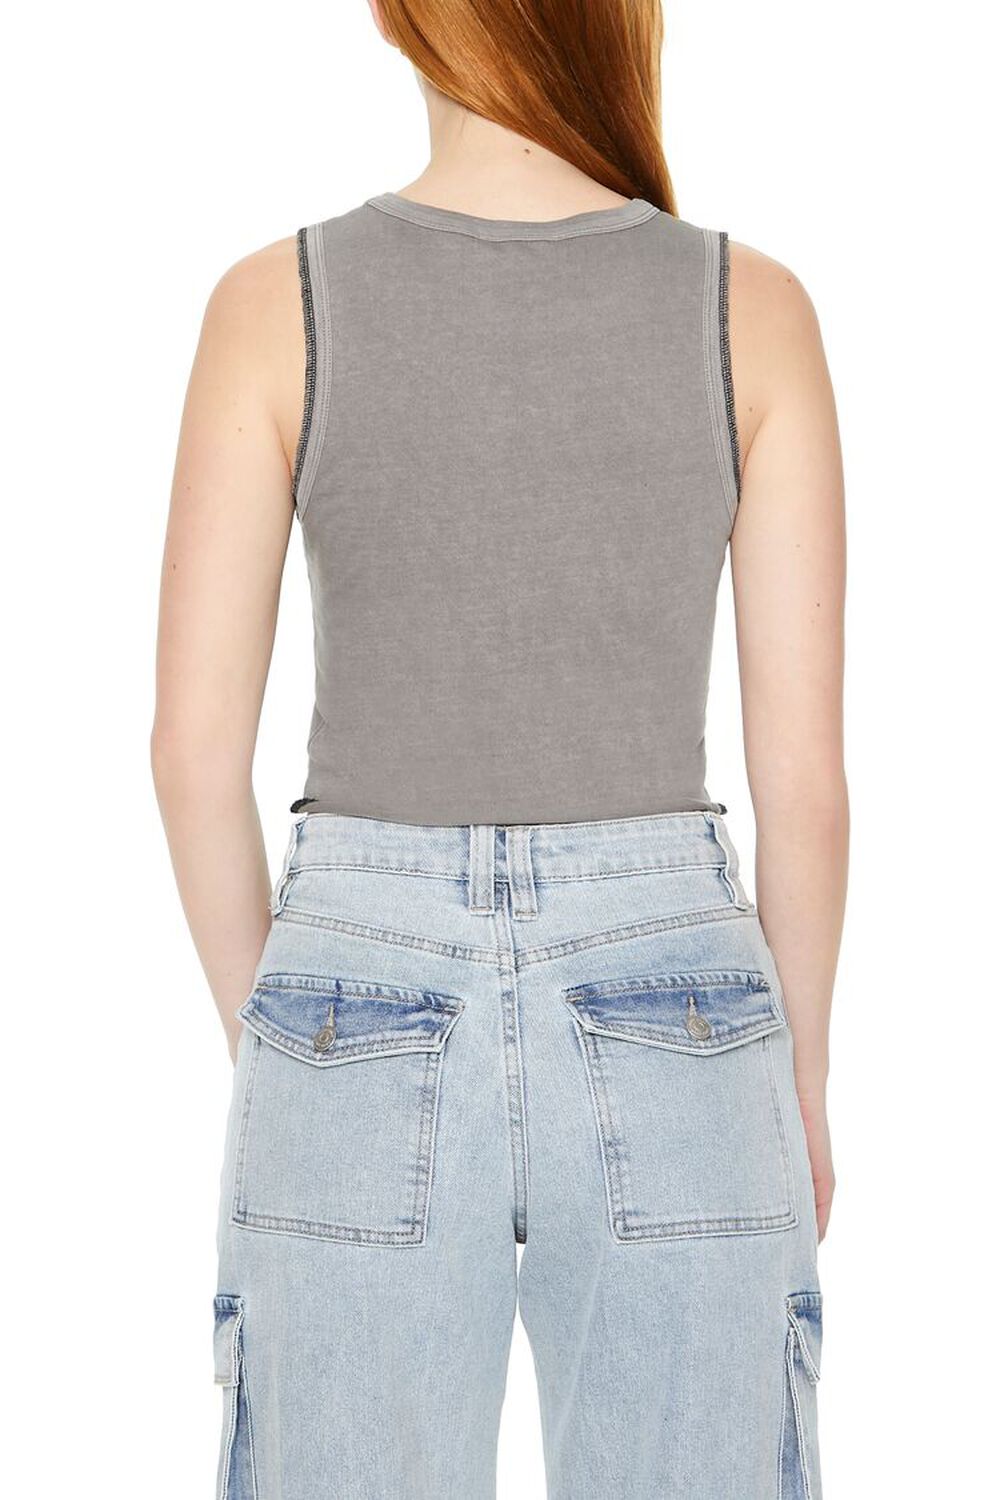 CHARCOAL/MULTI Cropped Austin Graphic Tank Top, image 3